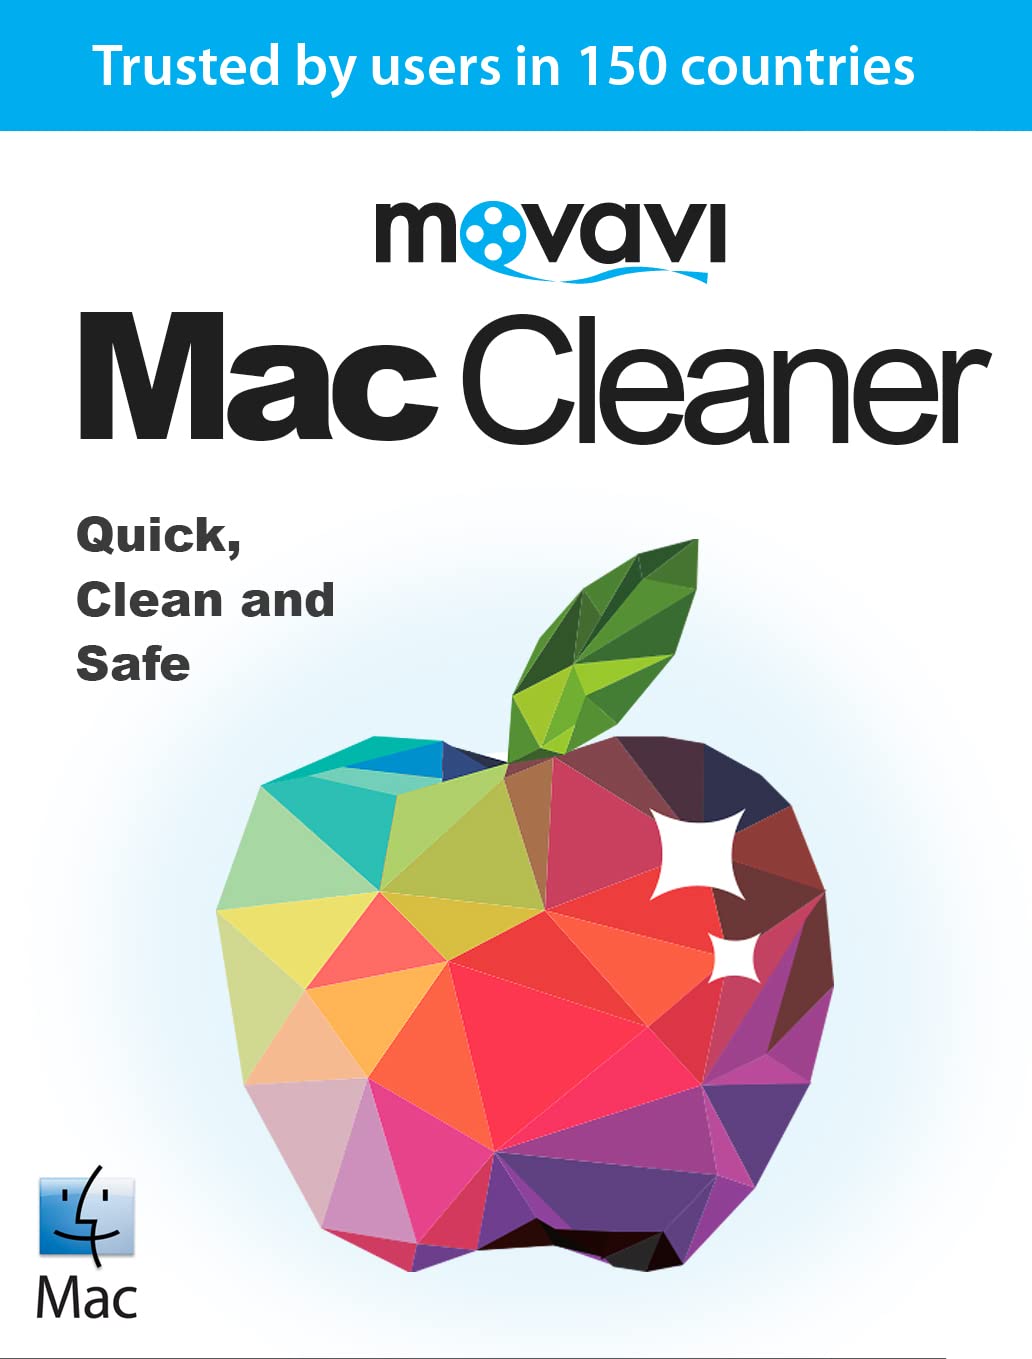 is mac cleaner safe